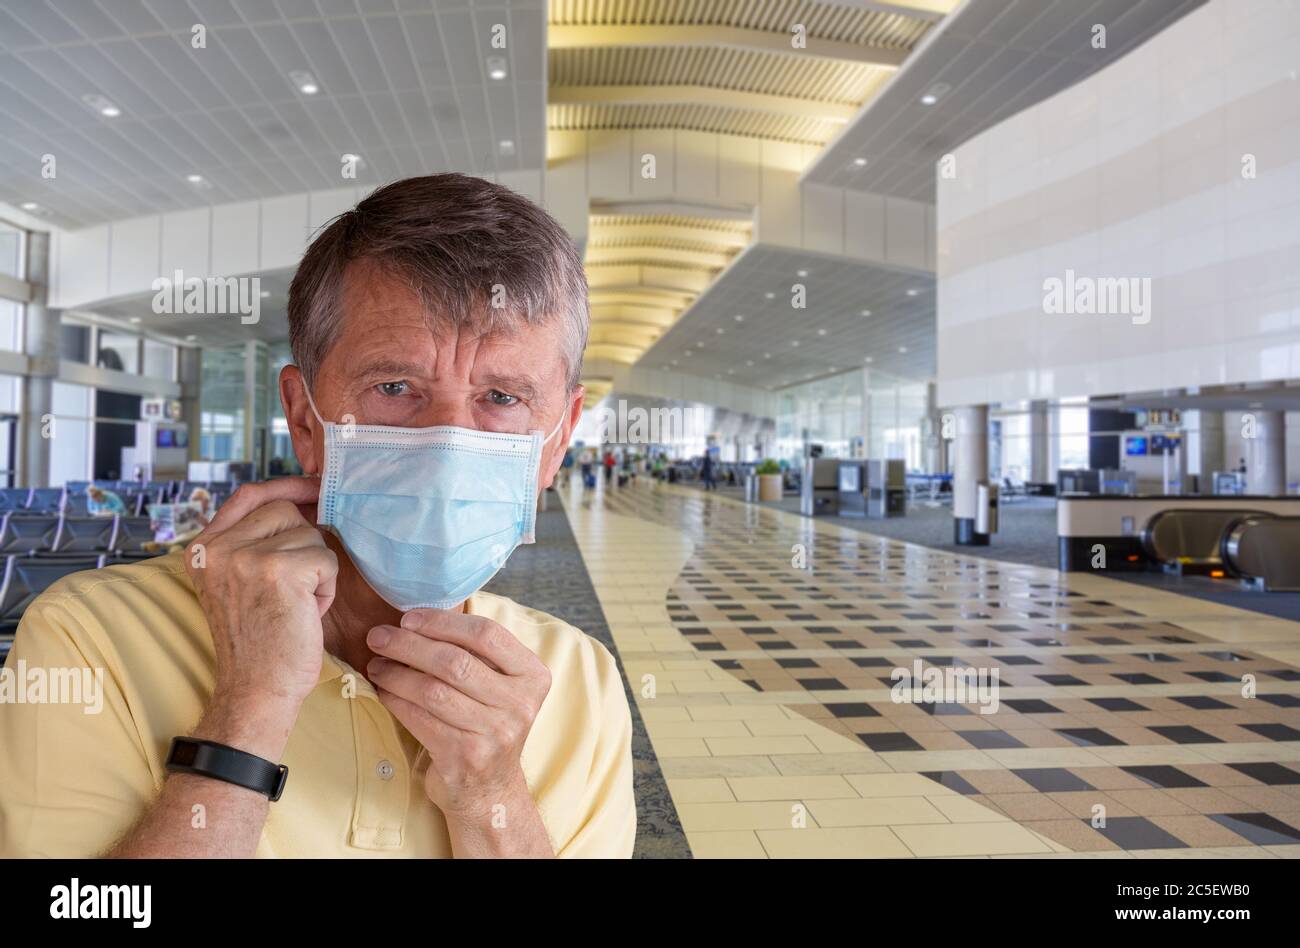 Senior man or traveler adjusting face mask in airport terminal and looking afraid of travel with coronavirus Stock Photo